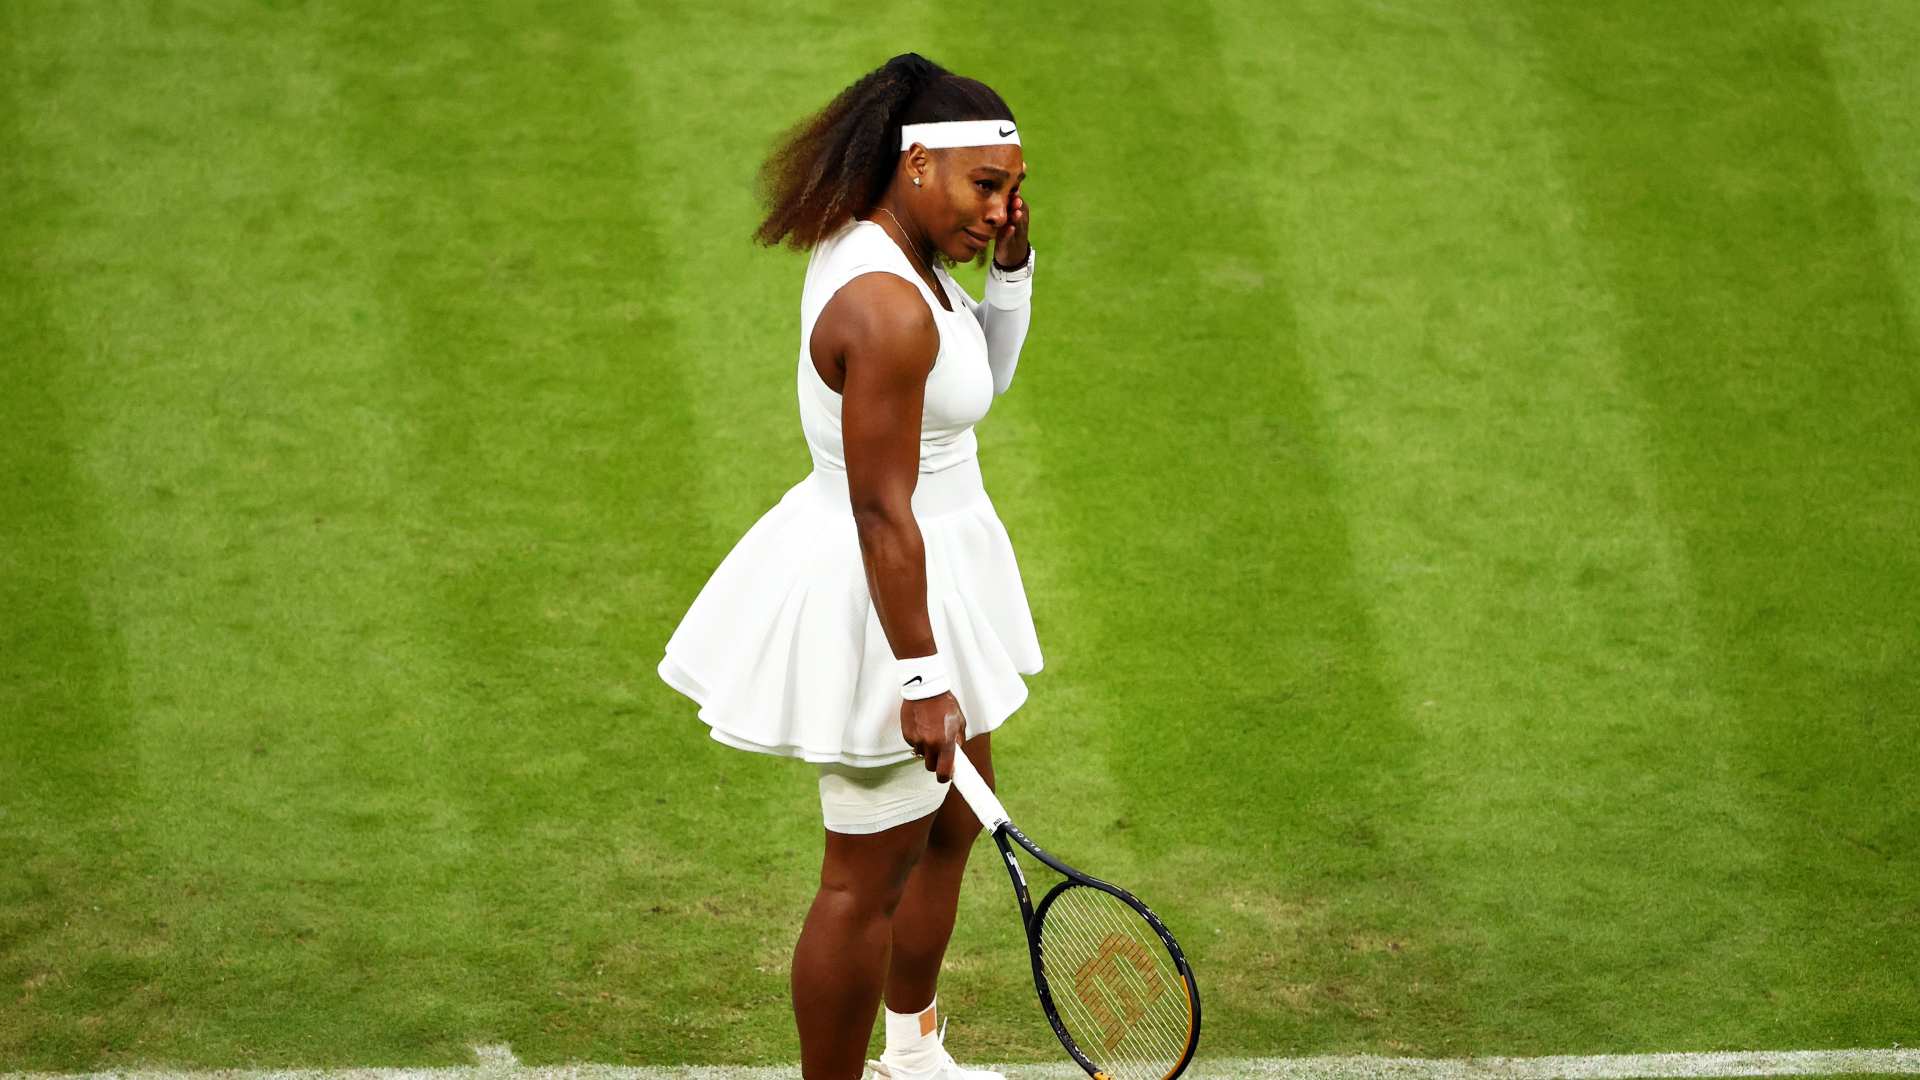 Serena Williams was left in tears after being forced to withdraw due to the injury, Image credit: Twitter